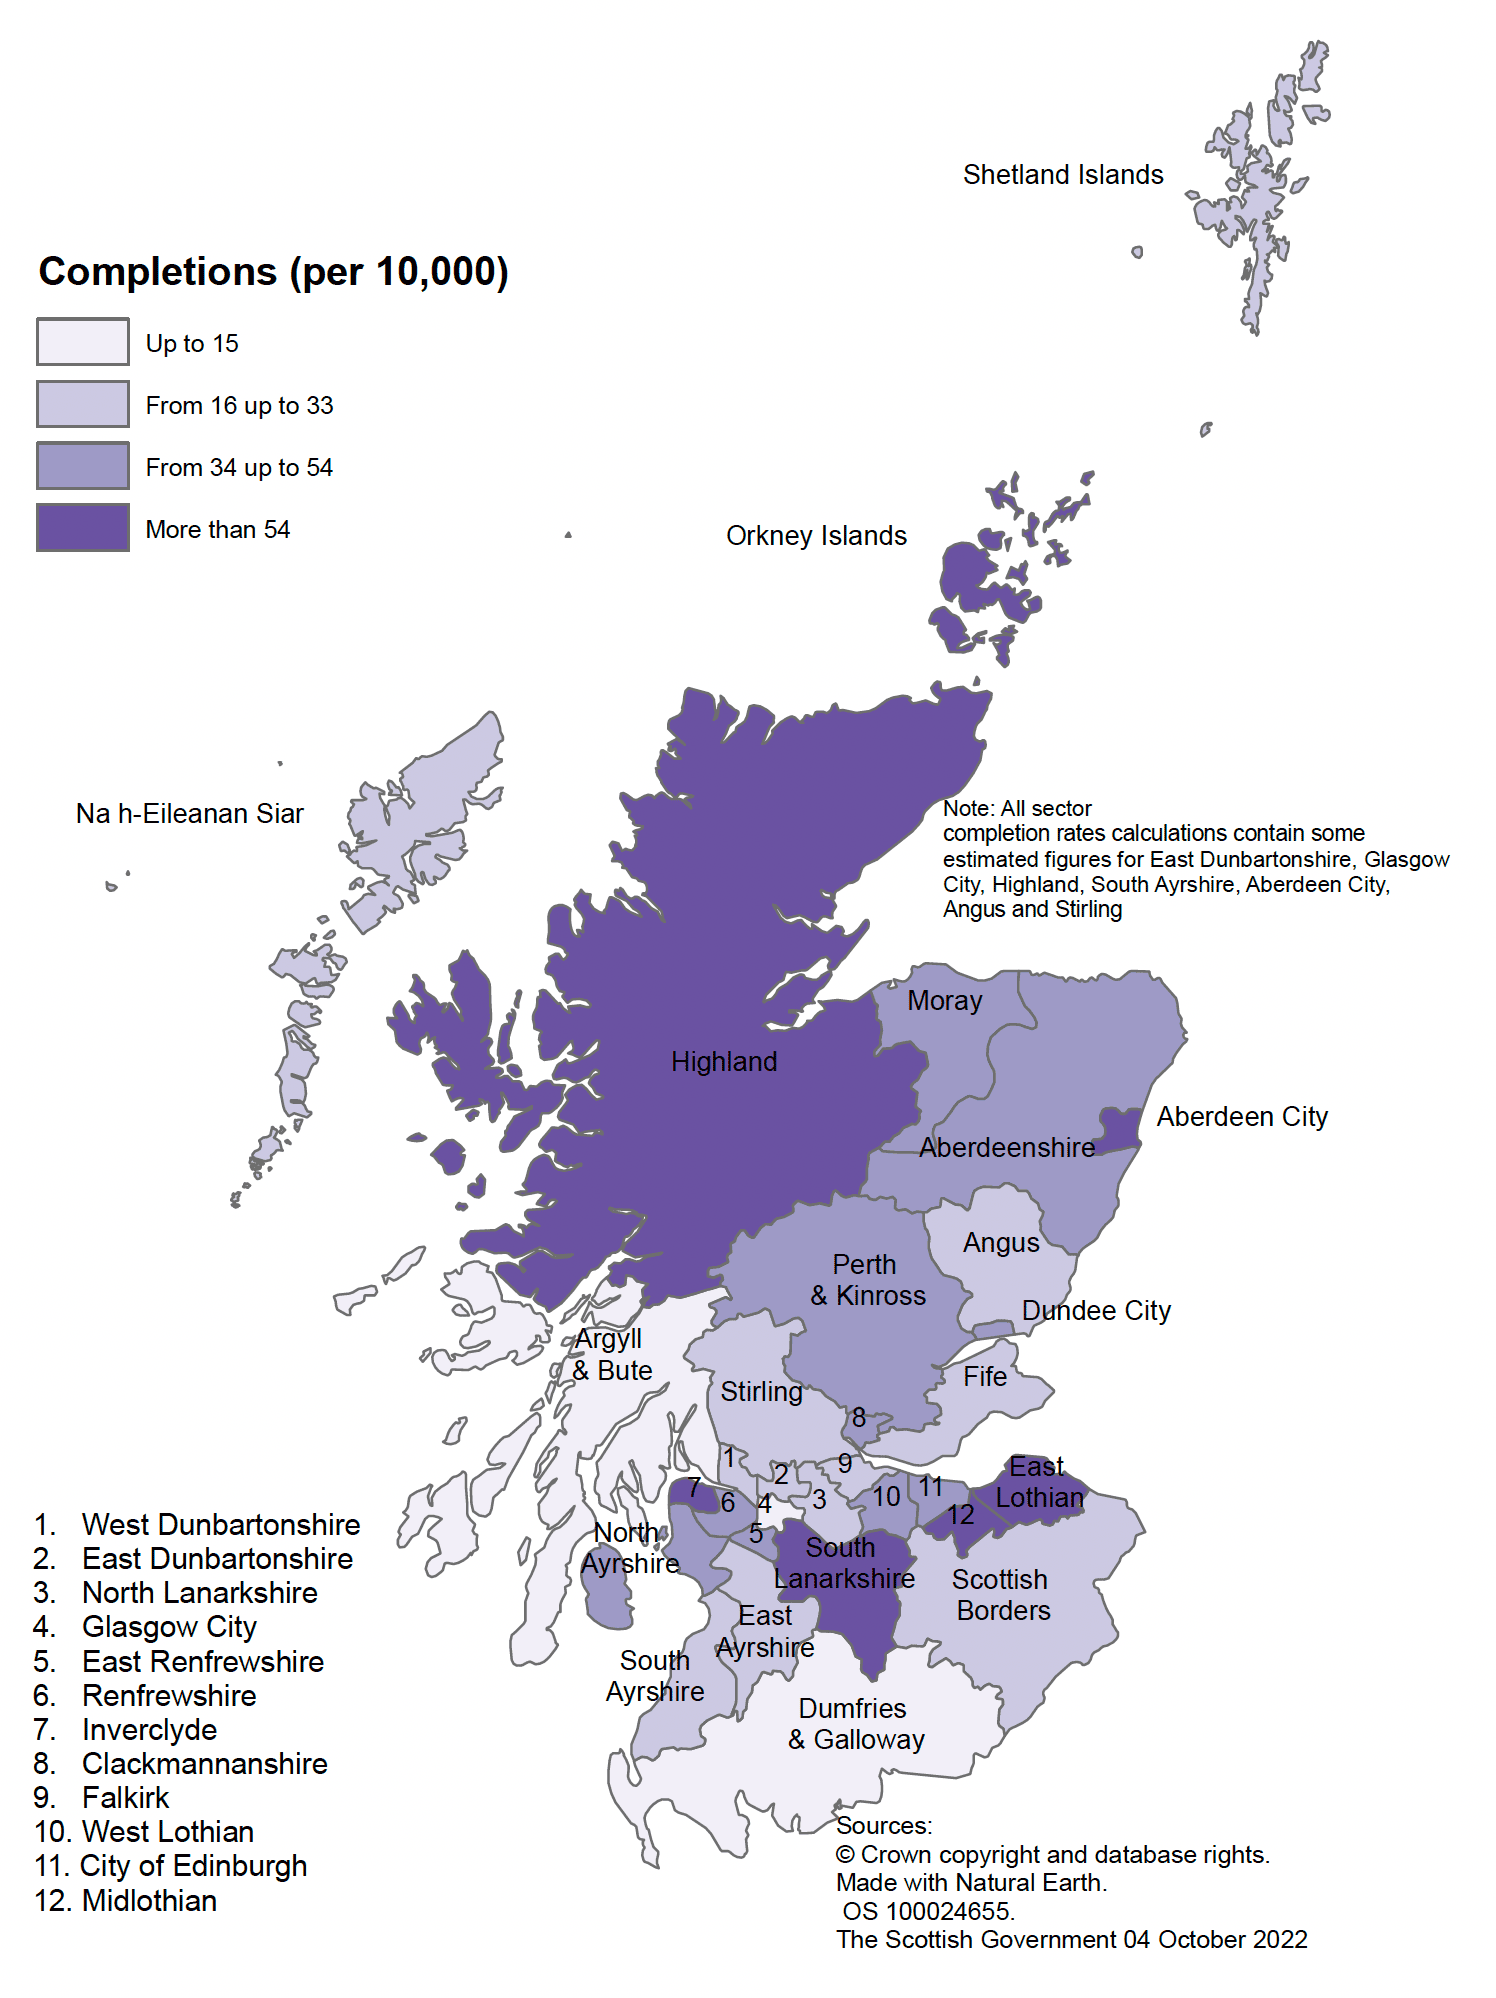 New build housing – A map of local authority areas in Scotland showing all-sector completion rates per 10,000 population for year to end March 2022. The highest rates were observed in Midlothian, Aberdeen City, Highland, East Lothian, South Lanarkshire, Orkney Islands, Inverclyde, and Perth & Kinross, with the lowest rates in Dumfries & Galloway and Glasgow City